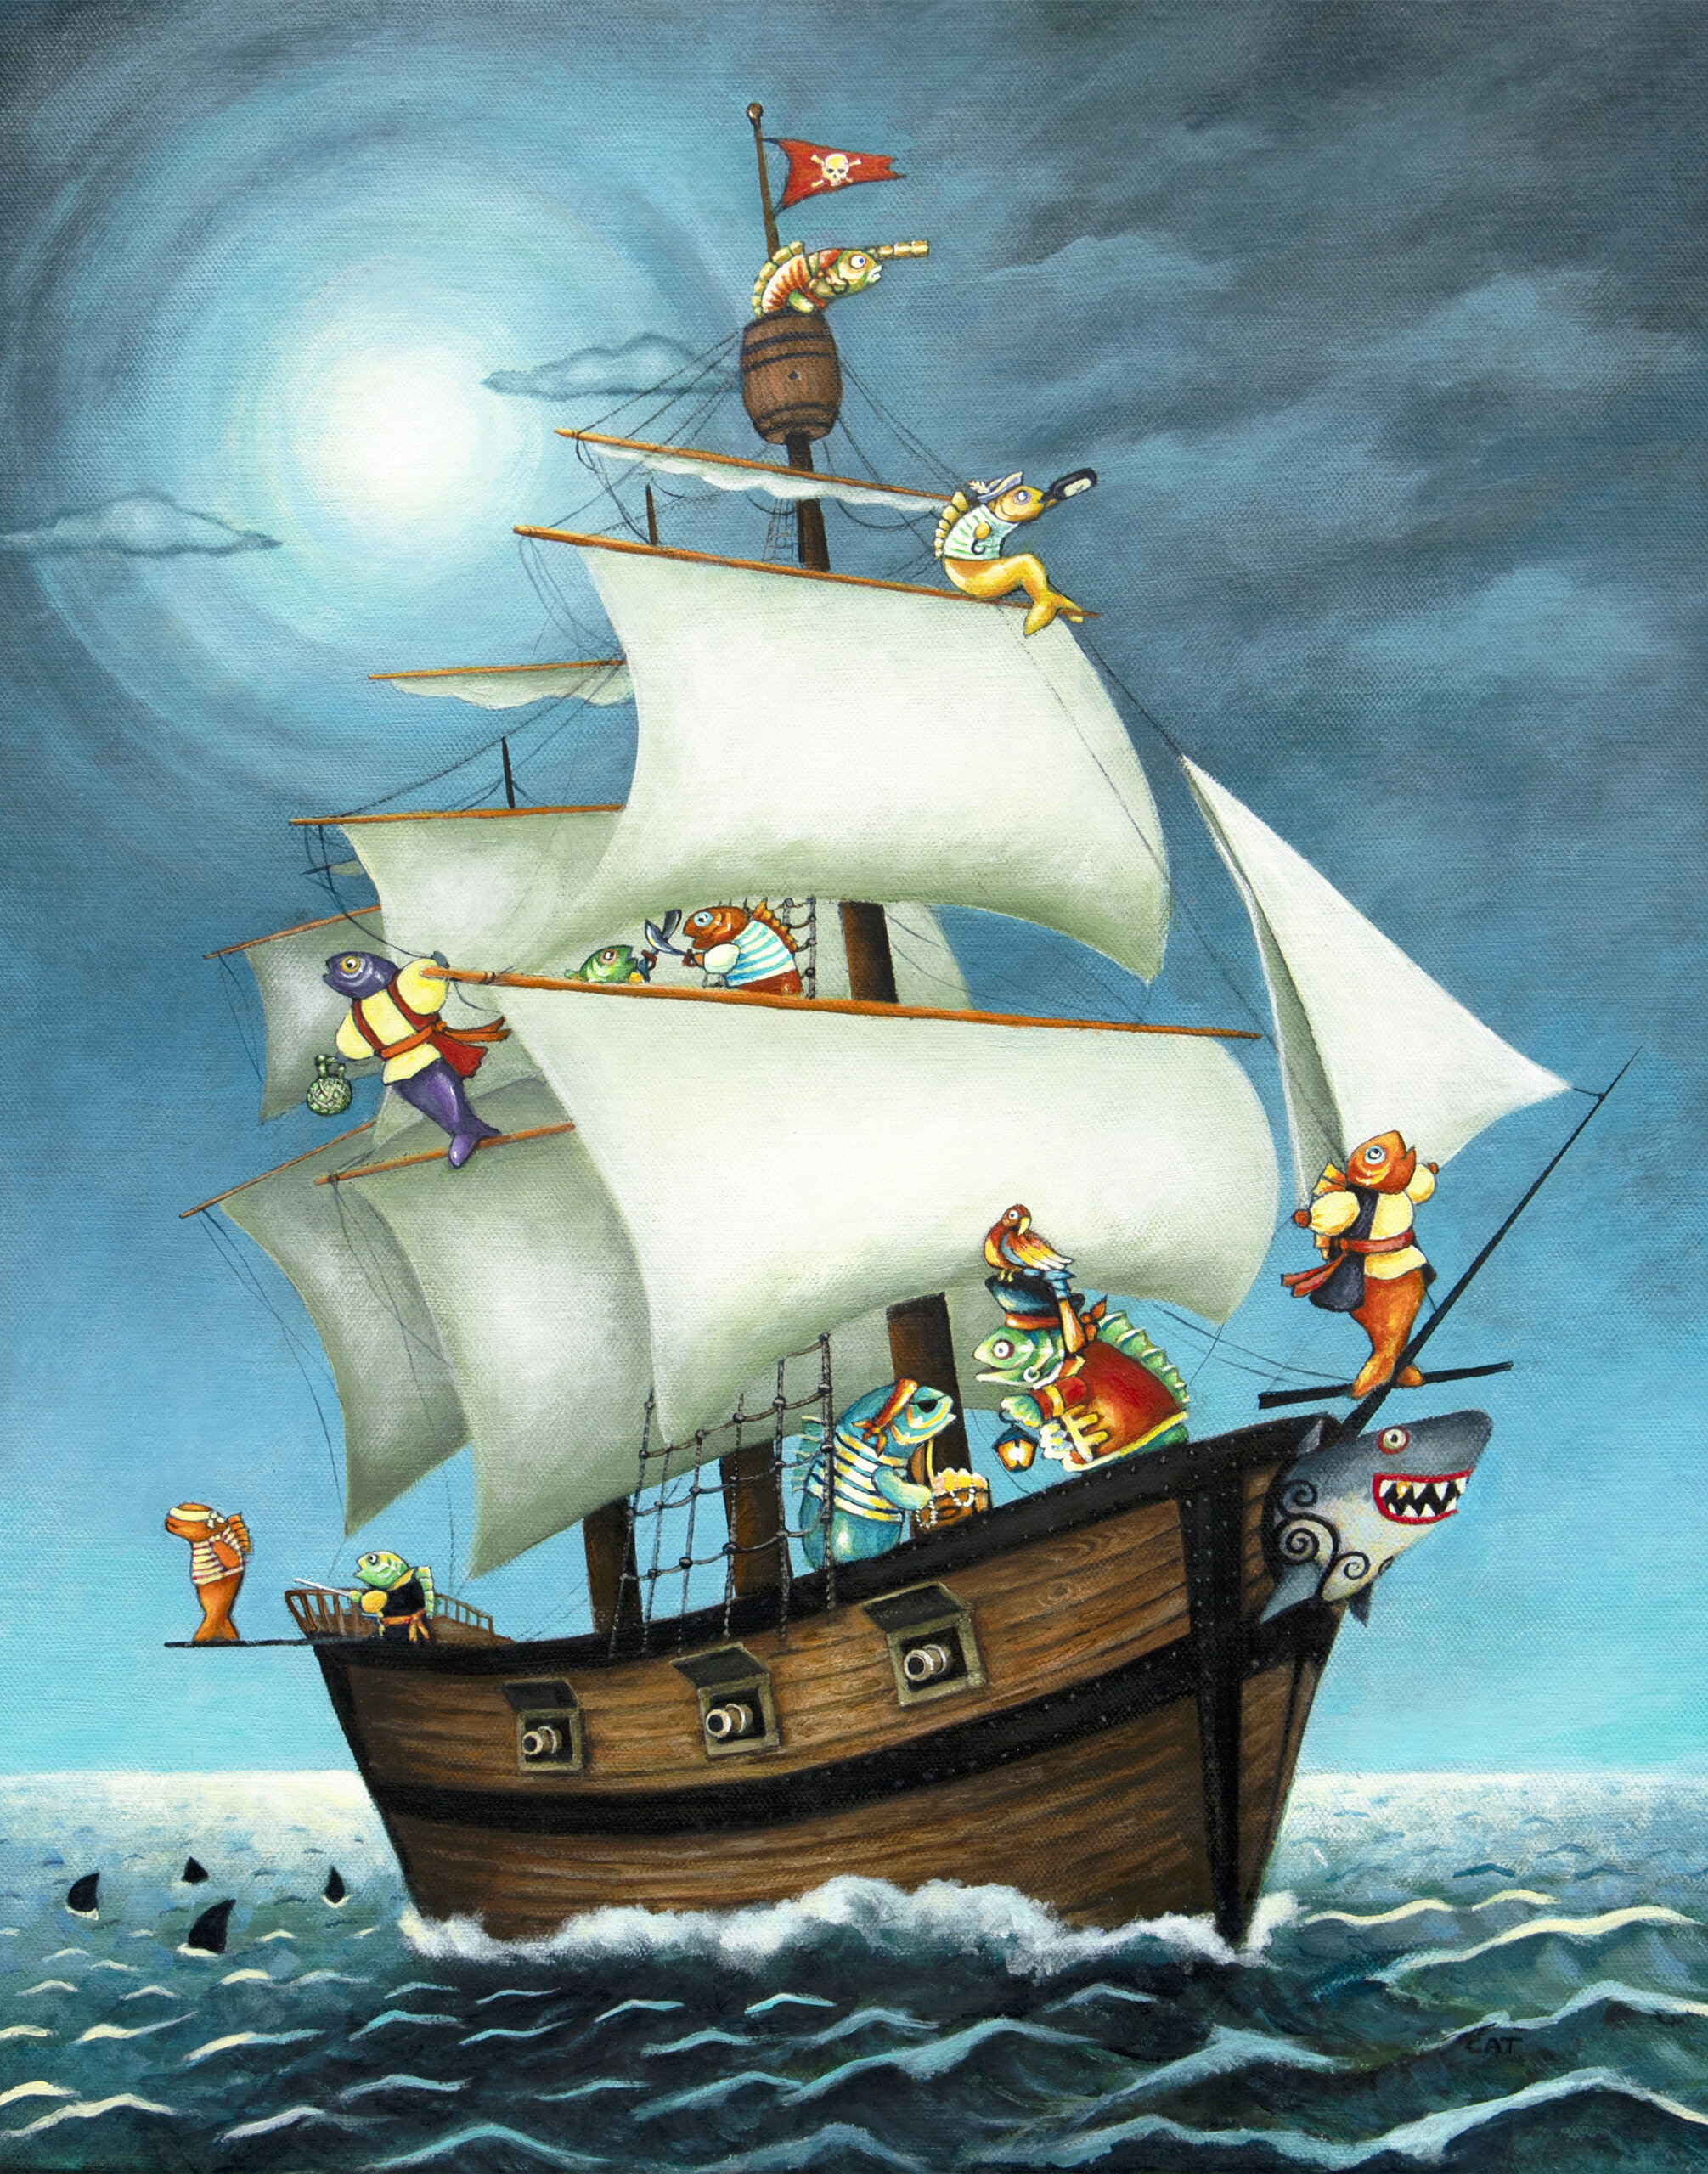 "The Pirate Ship" (11" x 14") by Cat Bachman